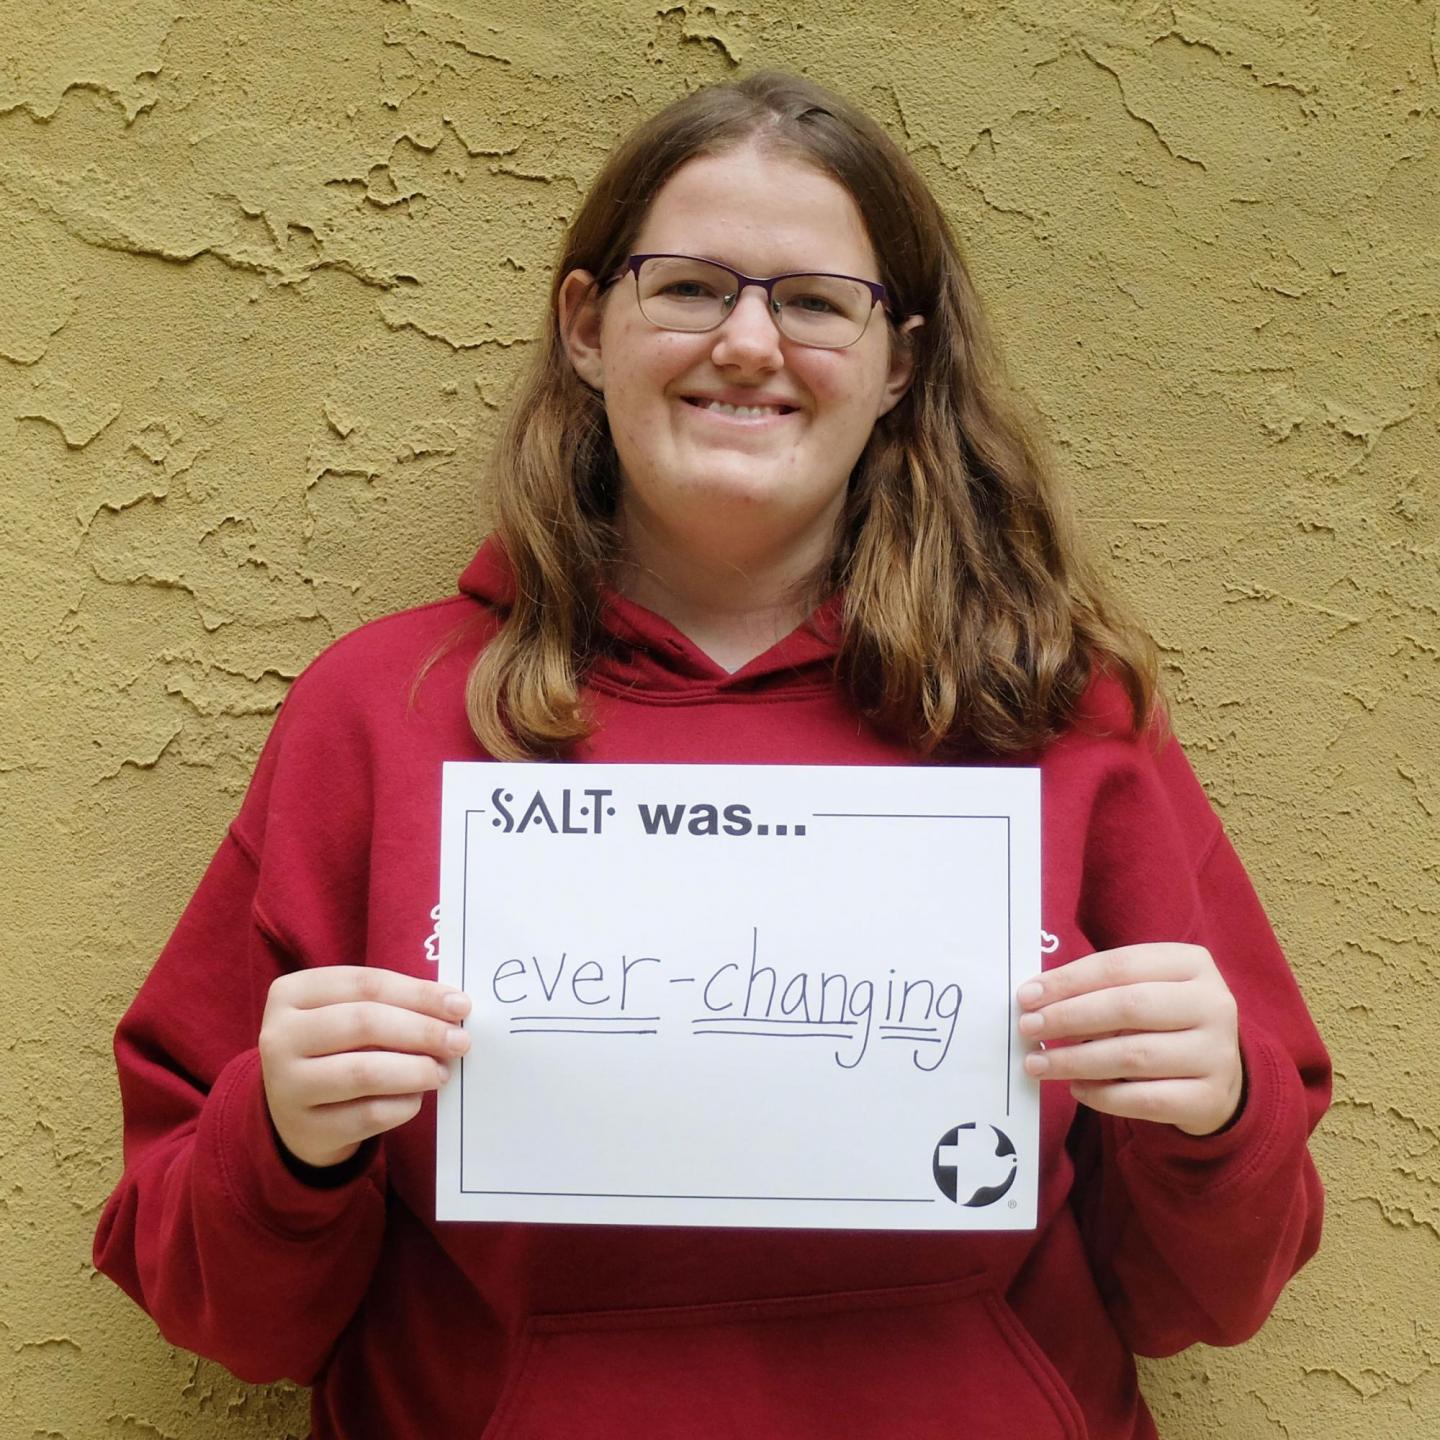 A young adult stands in front of a yellow wall and holds a sign that says, "SALT was ever-changing"